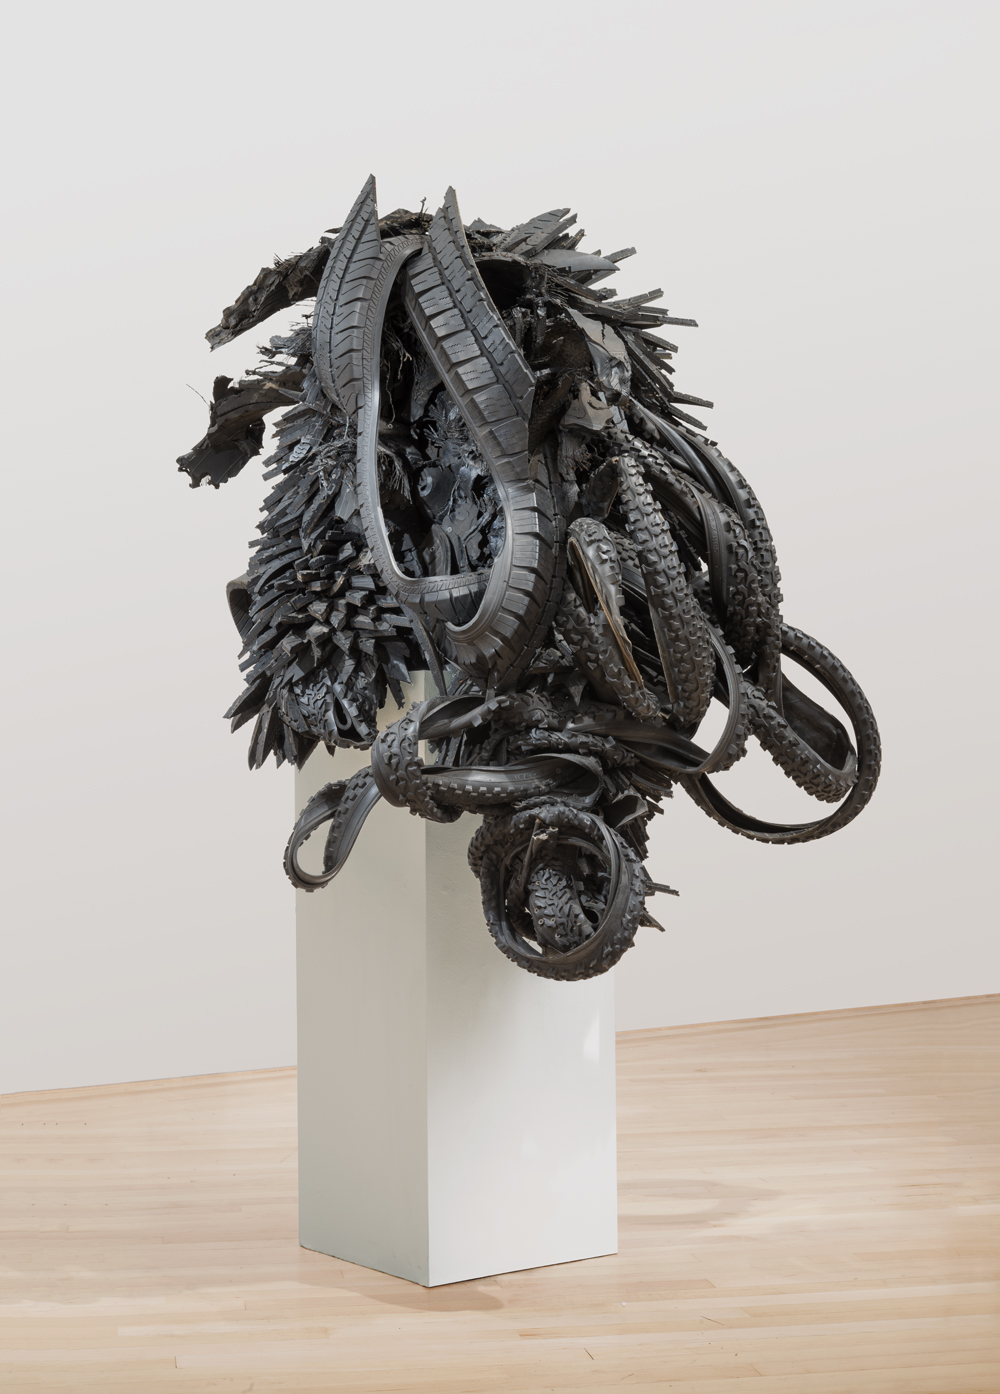 Chakaia Booker El Gato, 2001 rubber tire and wood , 48 x 42 x 42 inches Collection of the Kemper Museum of Contemporary Art, Bebe and Crosby Kemper Collection, Museum purchase, Enid and Crosby Kemper and William T. Kemper Acquisition Fund, 2004.12 © Chakaia Booker. Photo: E.G. Schempf